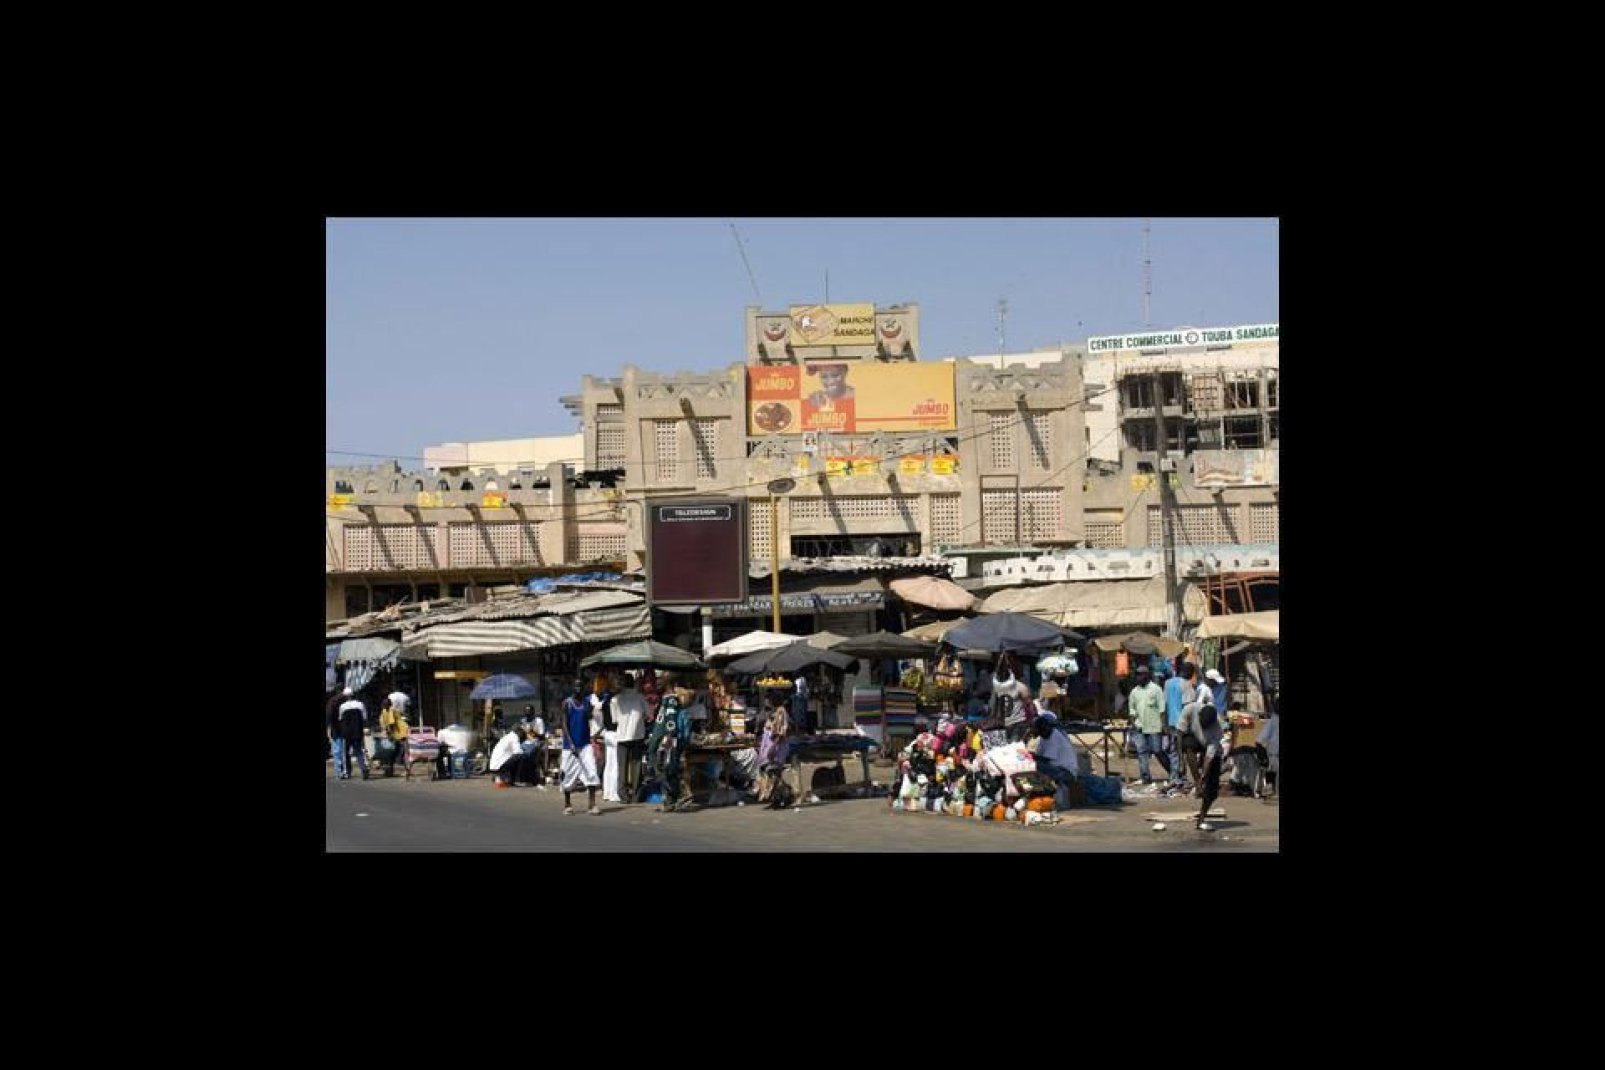 Dakar is home to a dozen or so markets, each with its own specific characteristics and atmosphere.